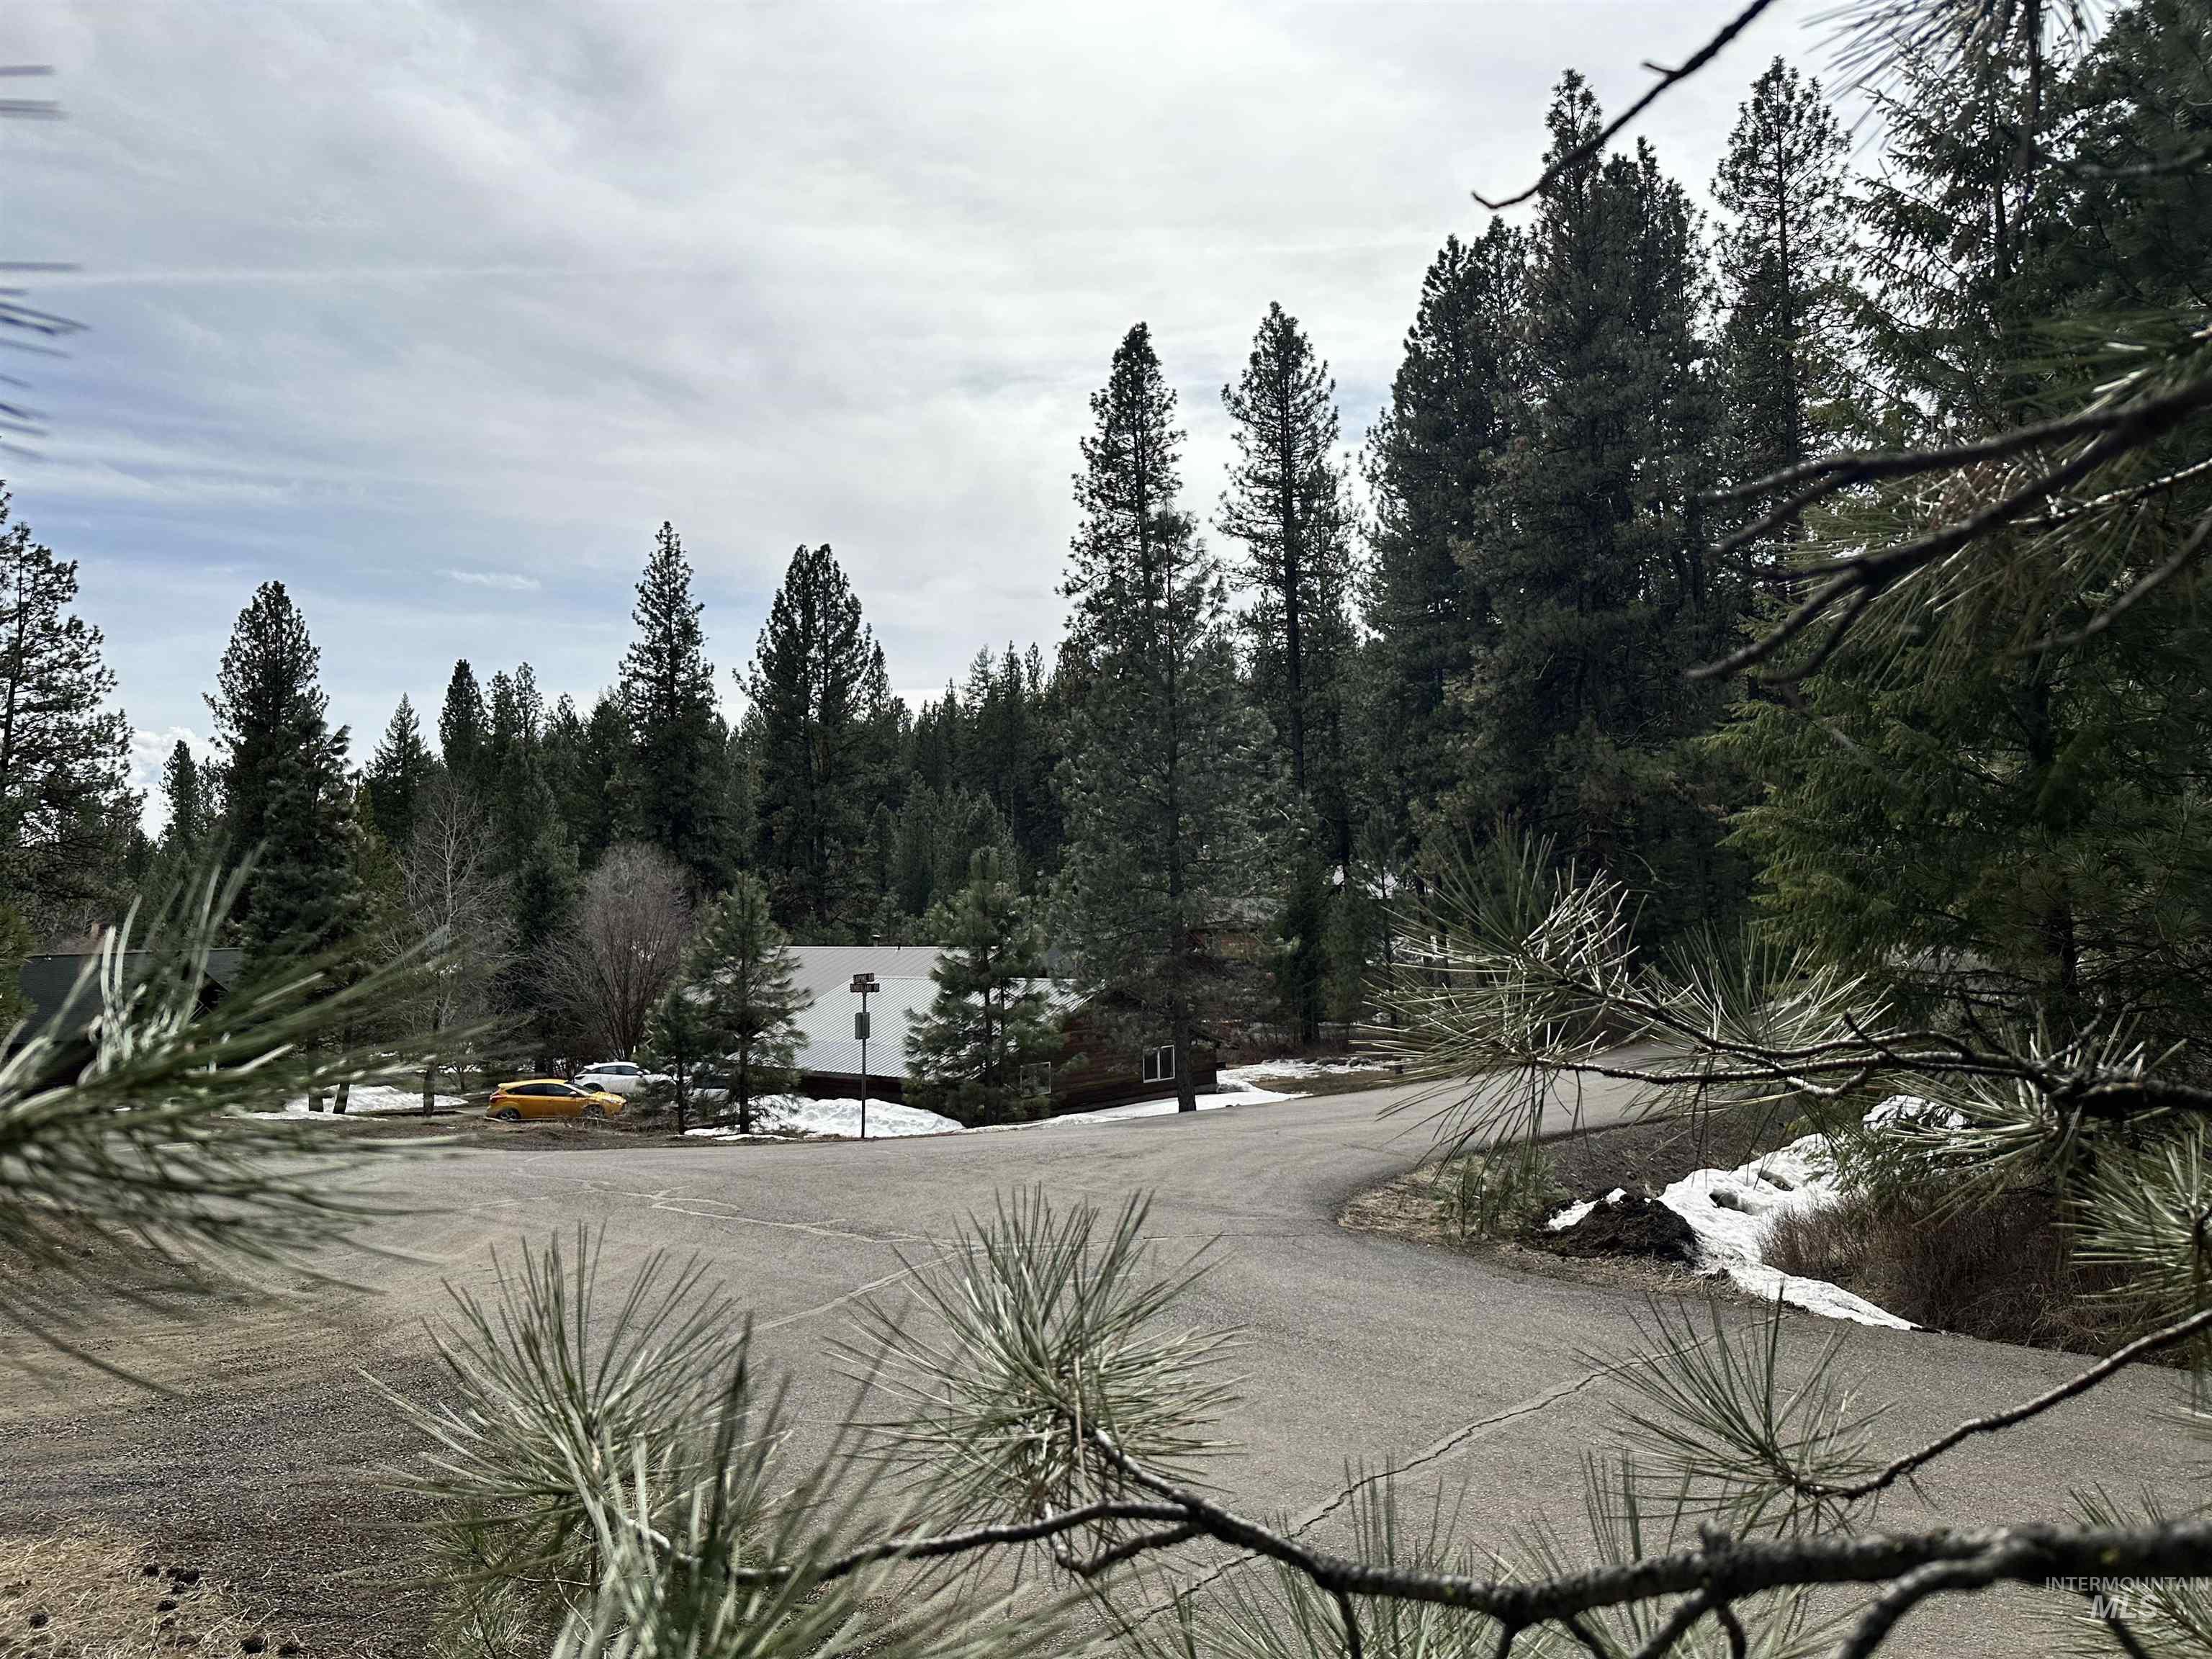 Lot 5 Blk 1 Kimberland Drive, New Meadows, Idaho 83654, Land For Sale, Price $80,000,MLS 98904997